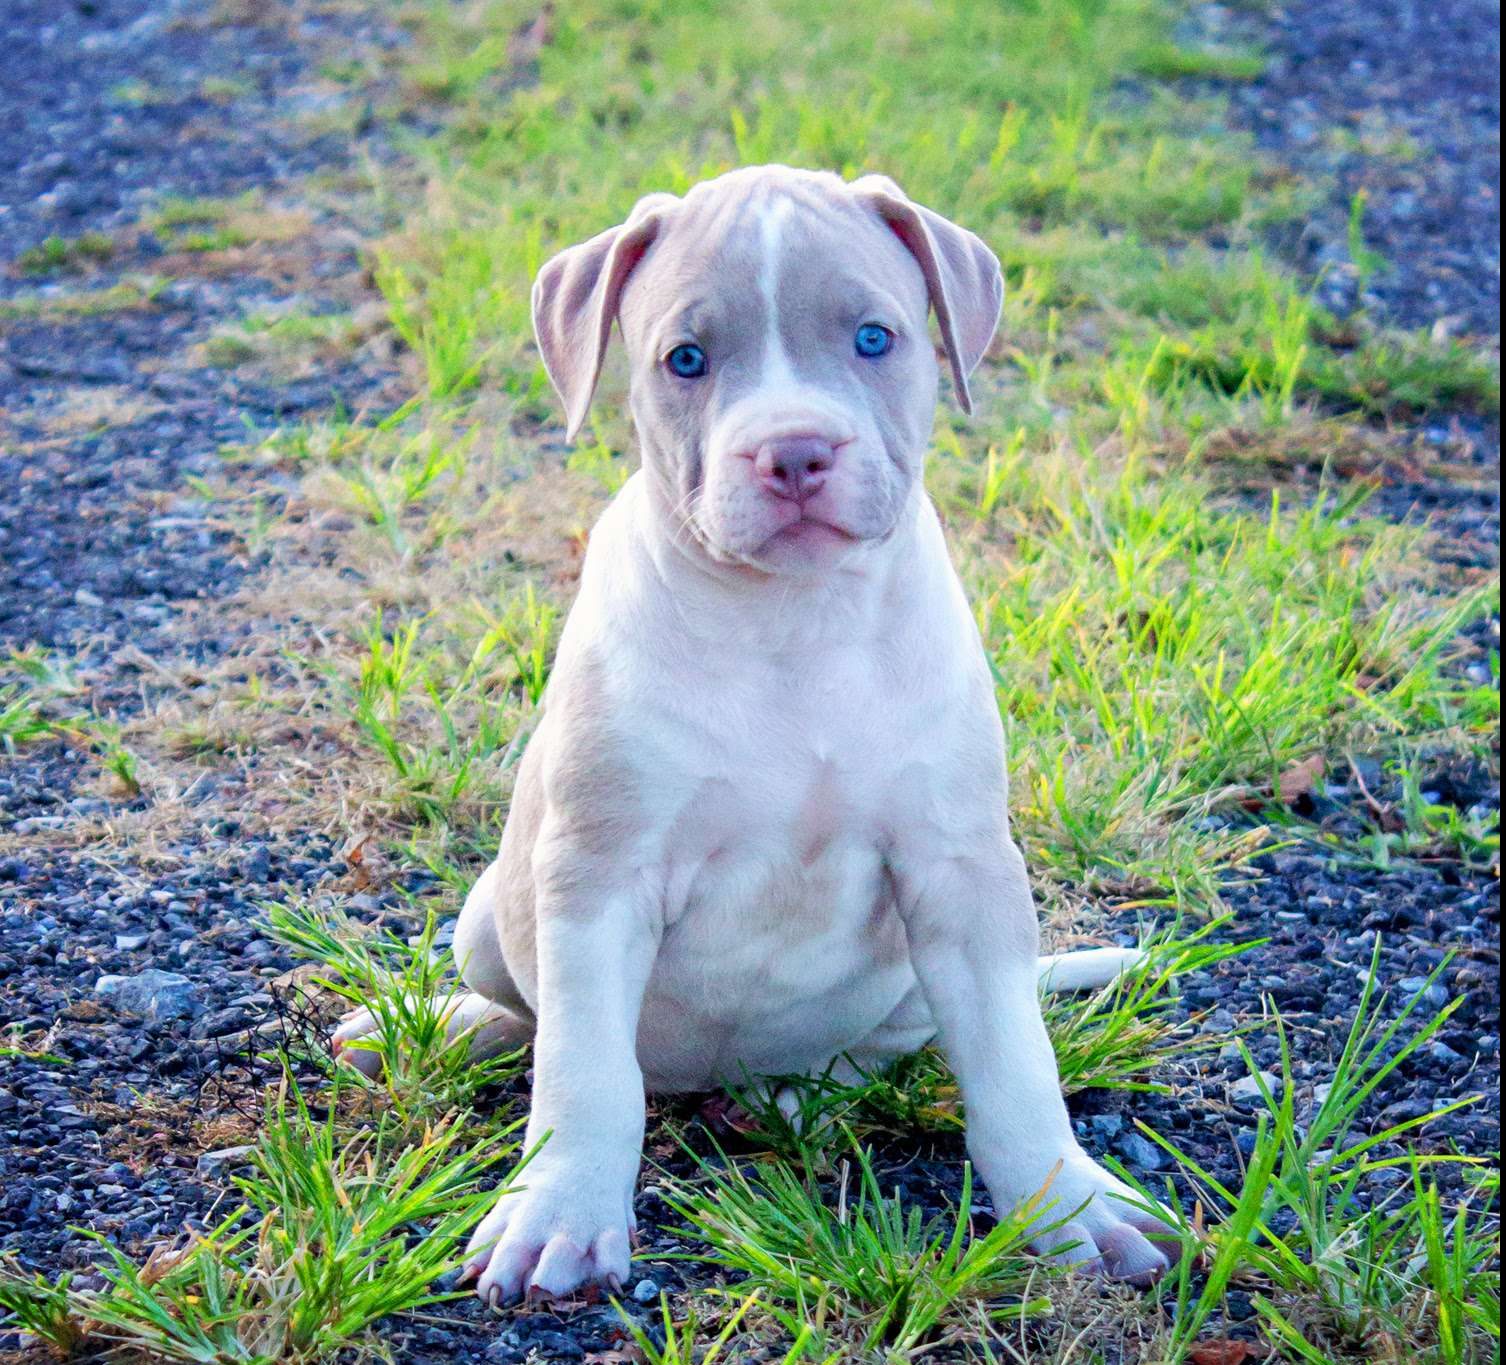 American Bully Puppies For Sale | Greenfield Puppies